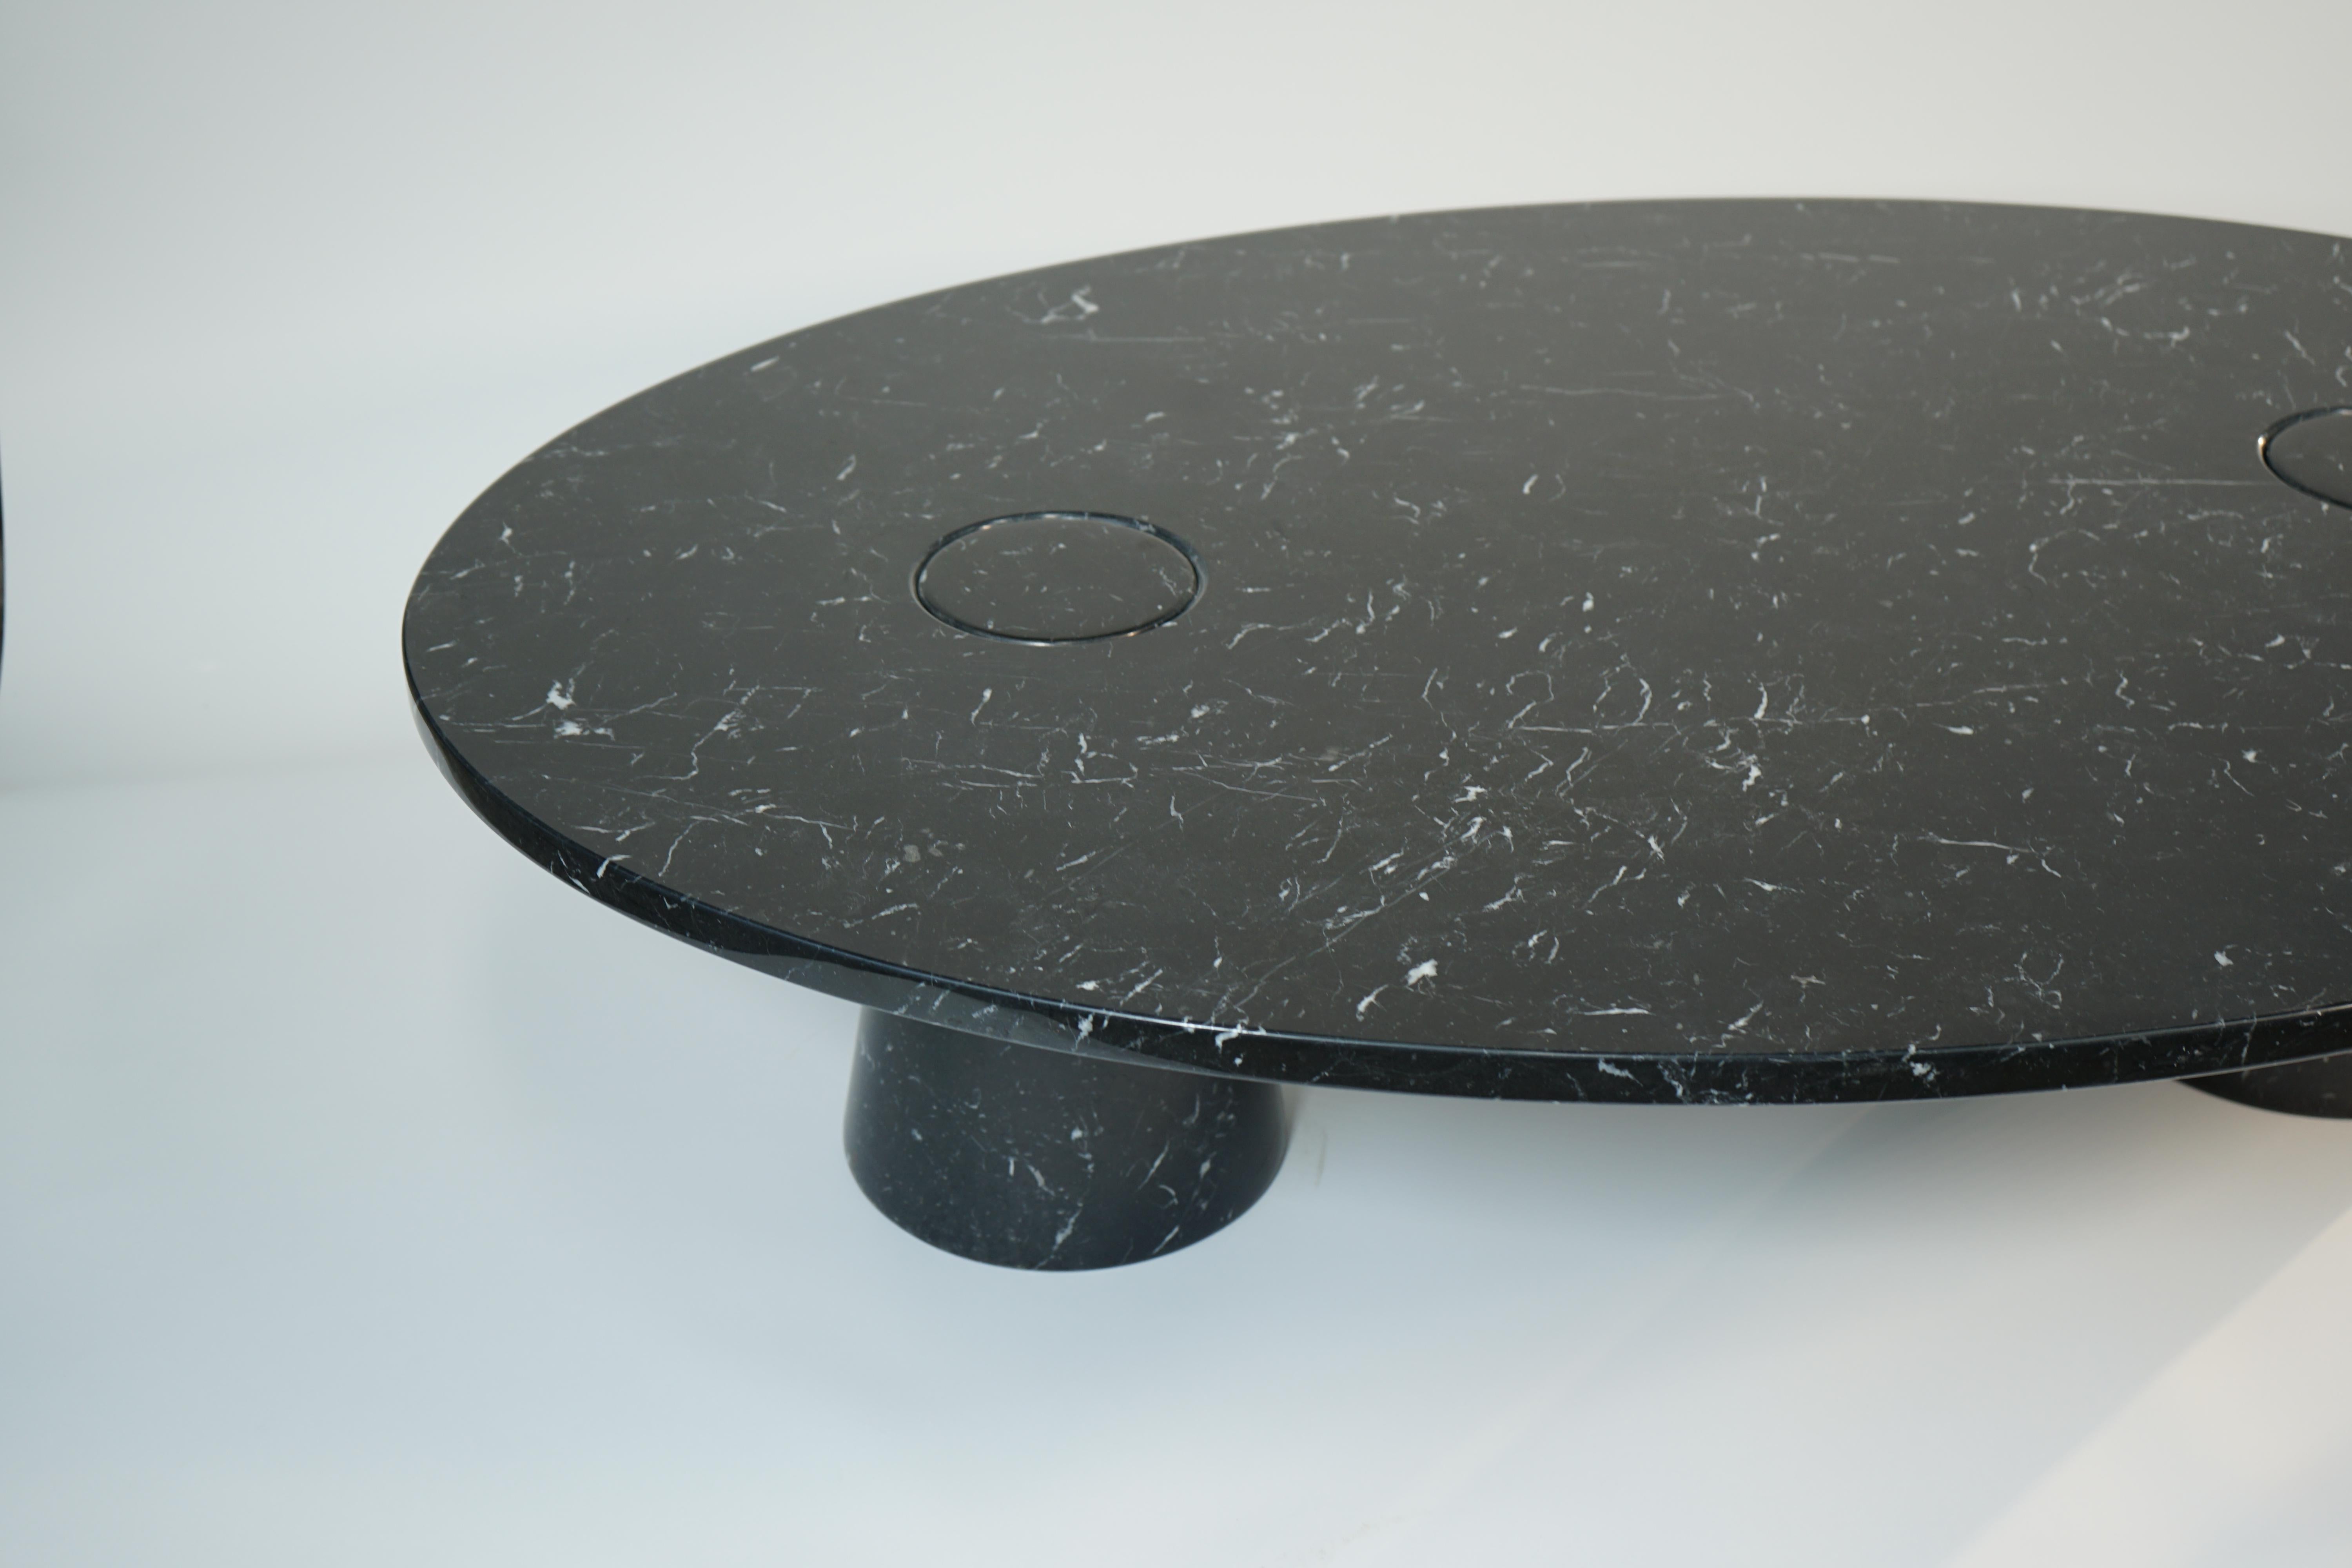 Eros black marble table designed by Algelo Mangiarotti and produced by Skipper in 1970.